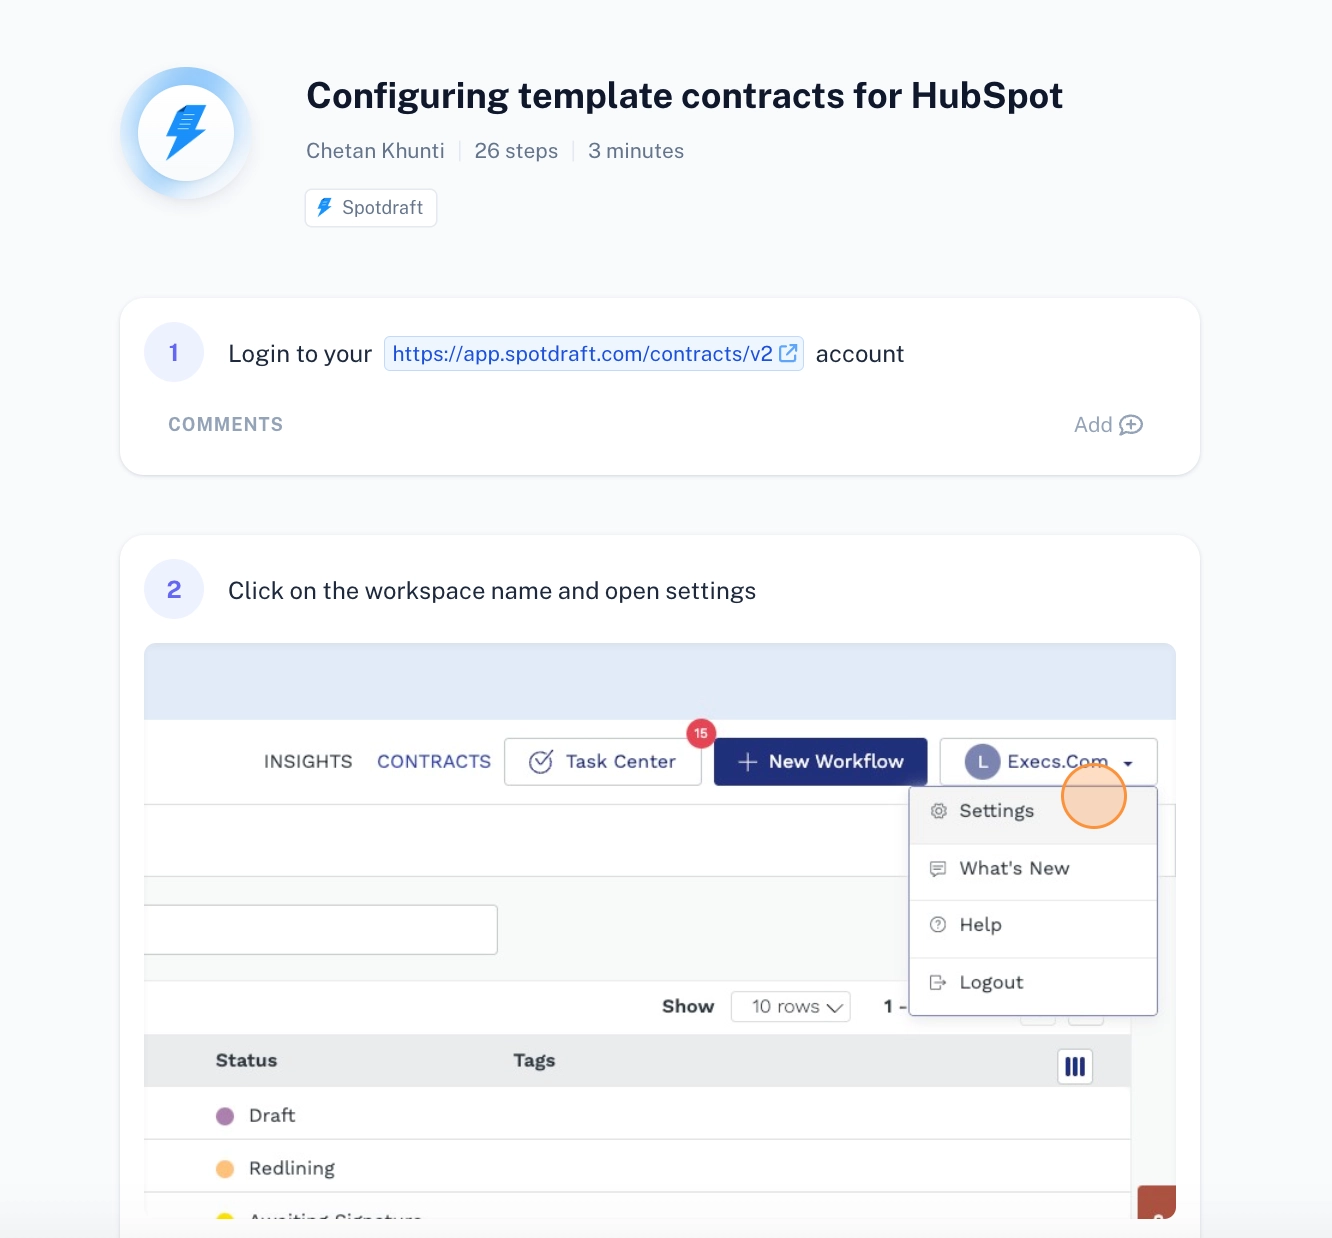 Configuring template contracts for HubSpot